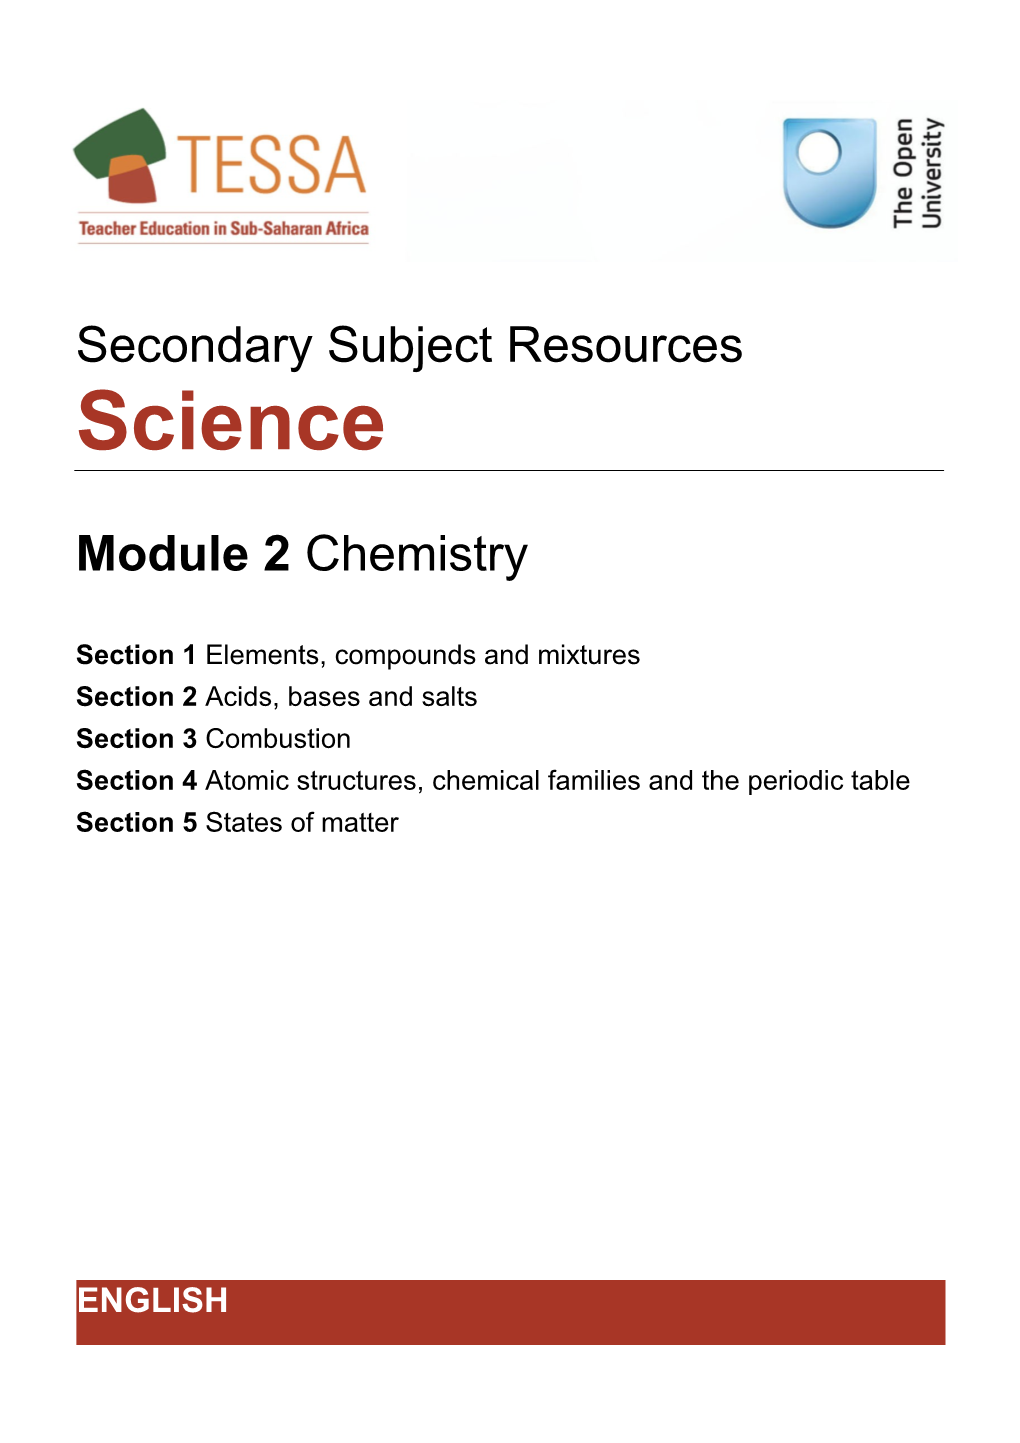 Module 2: Secondary Science - Chemistry